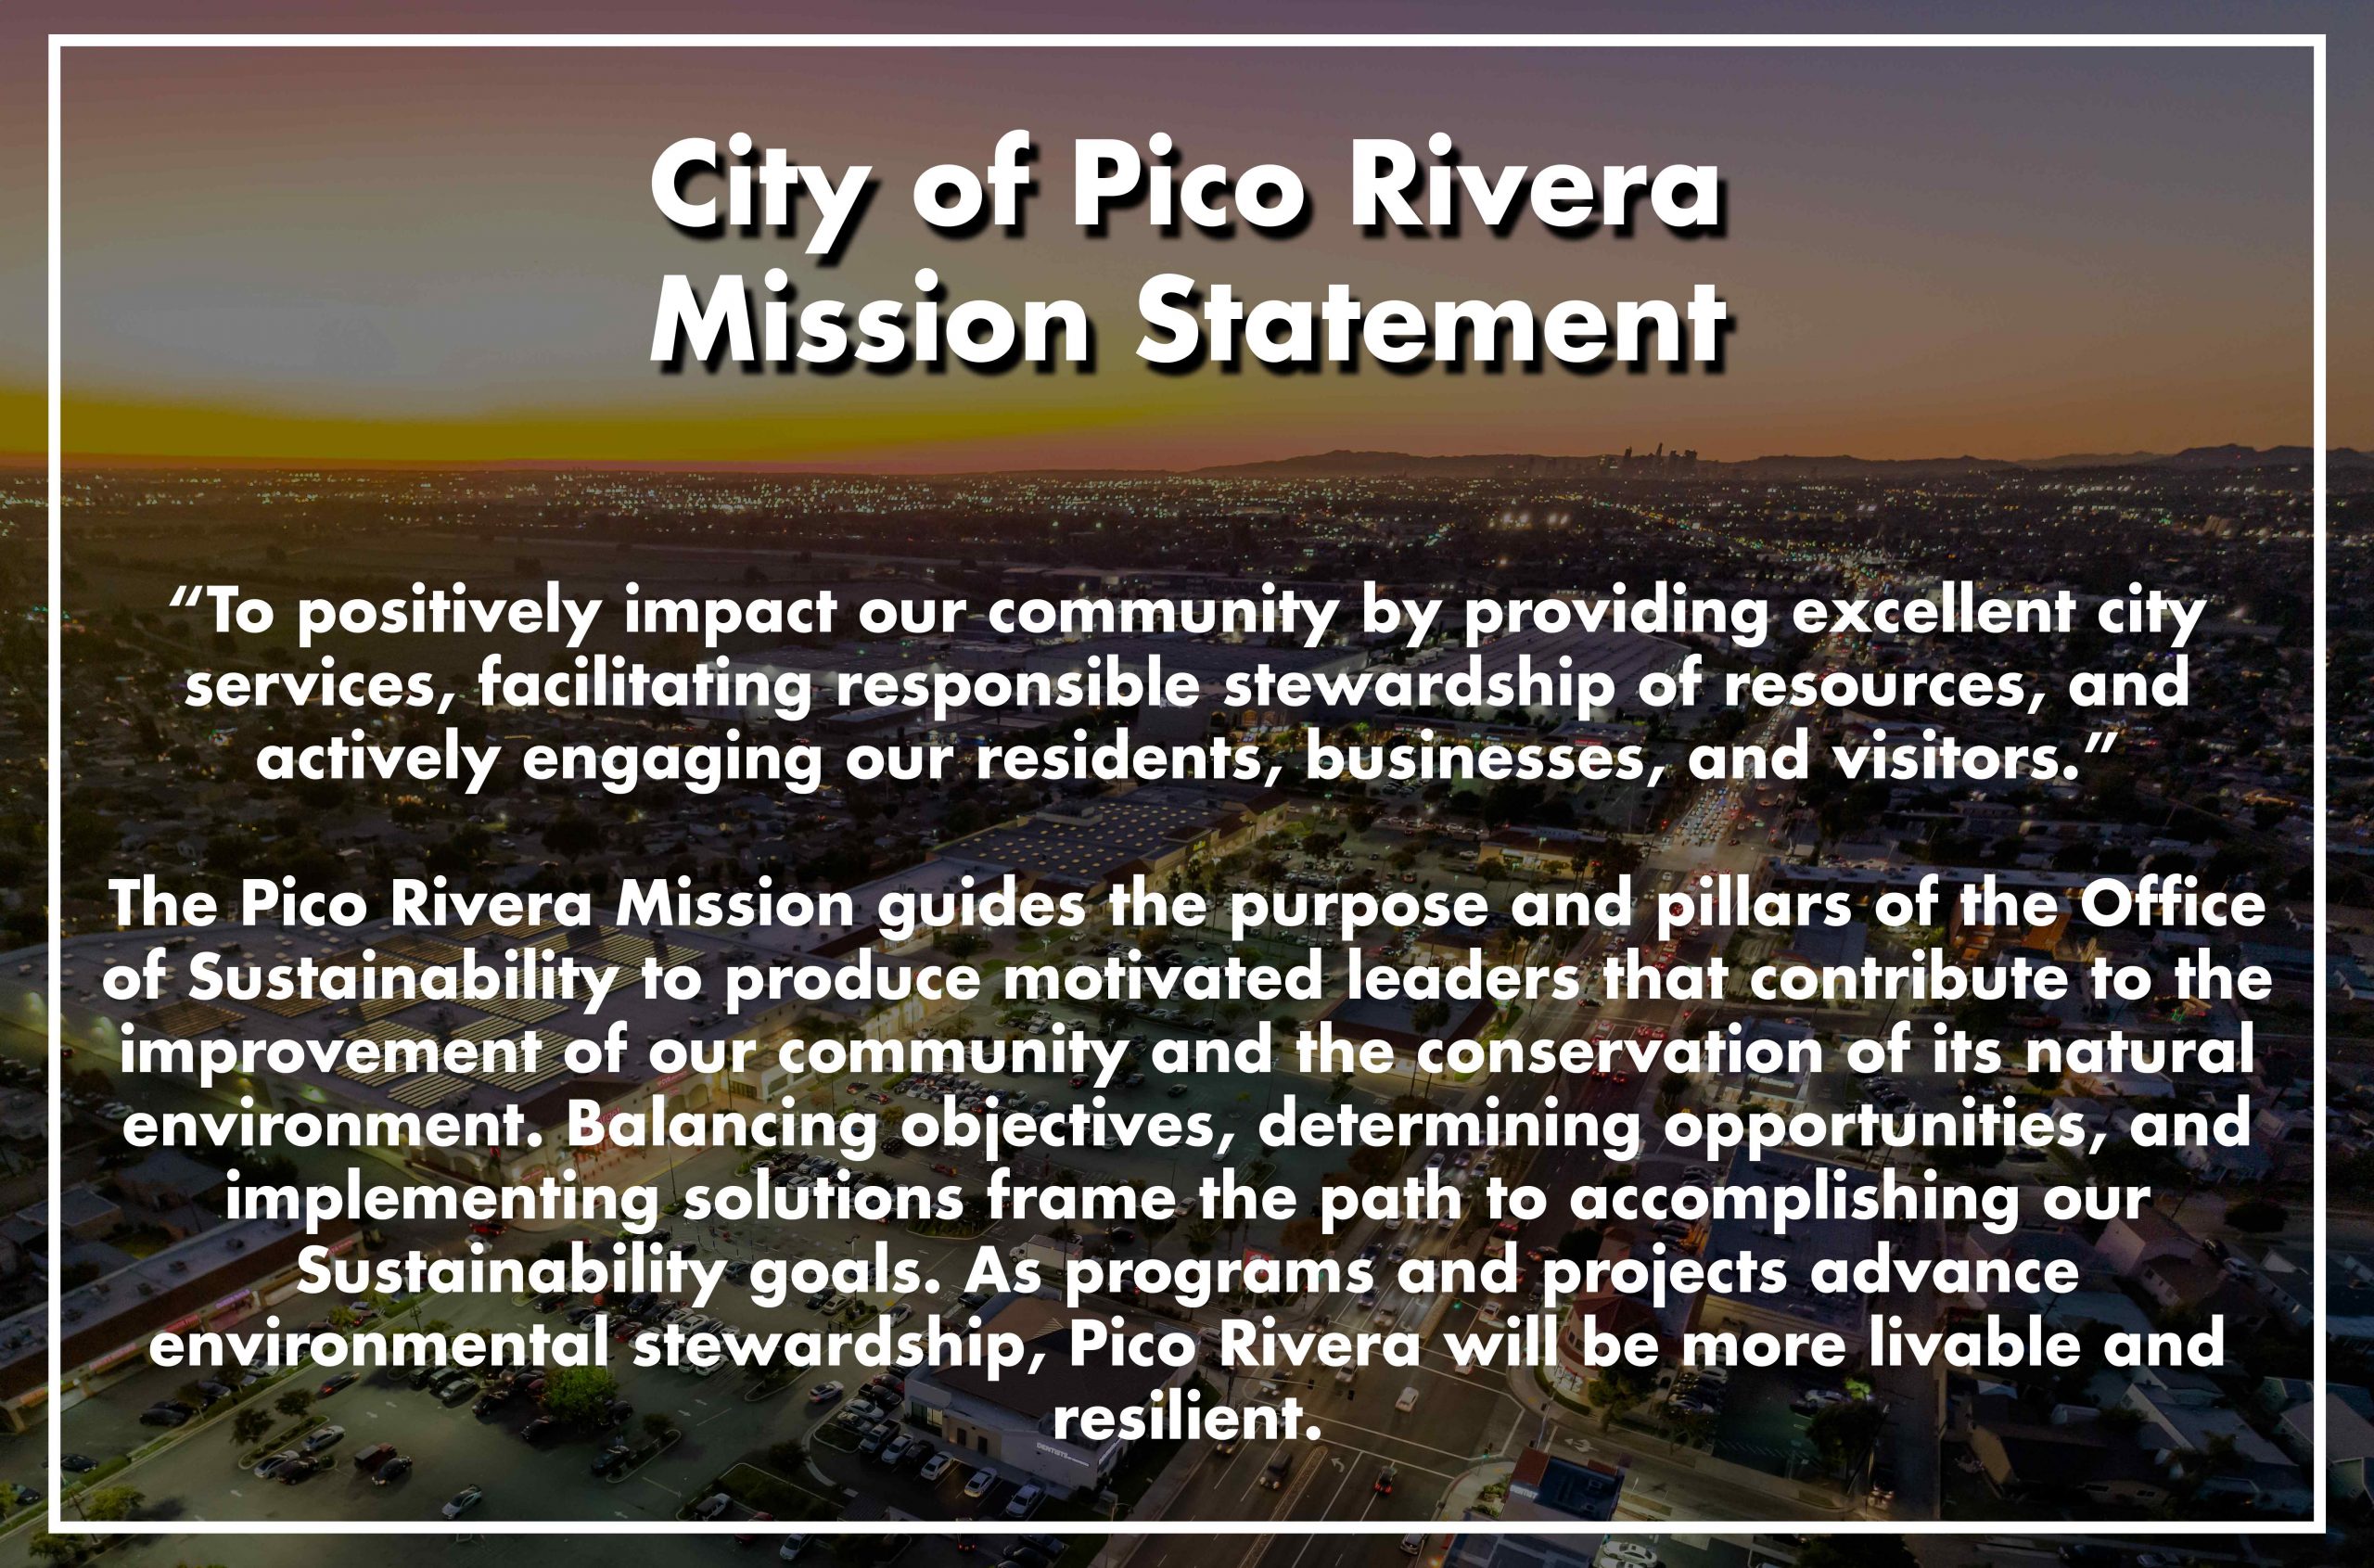 A photo overlooking the City of Pico Rivera superimposed with a City's Mission Statement